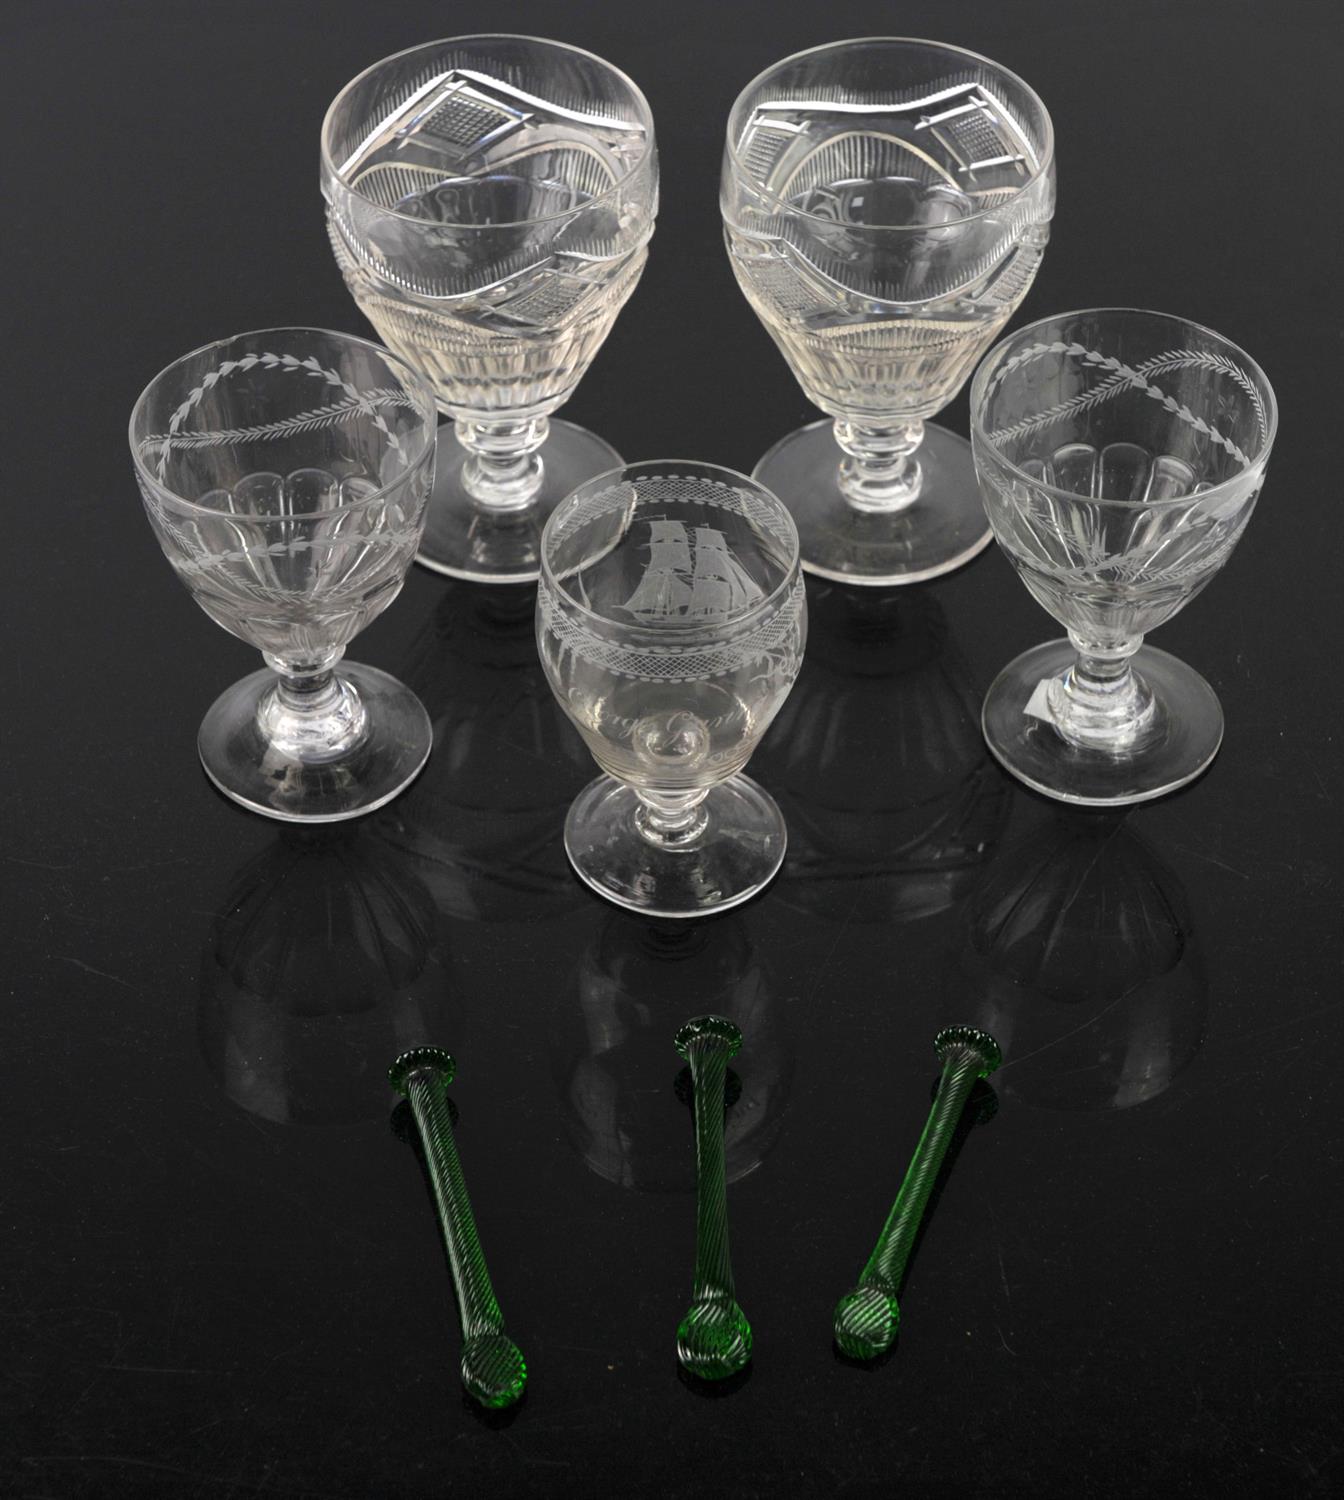 Glass rummer, 19th Century, engraved with the name George Guring, flanked by hop and wheatsheaf - Image 2 of 2